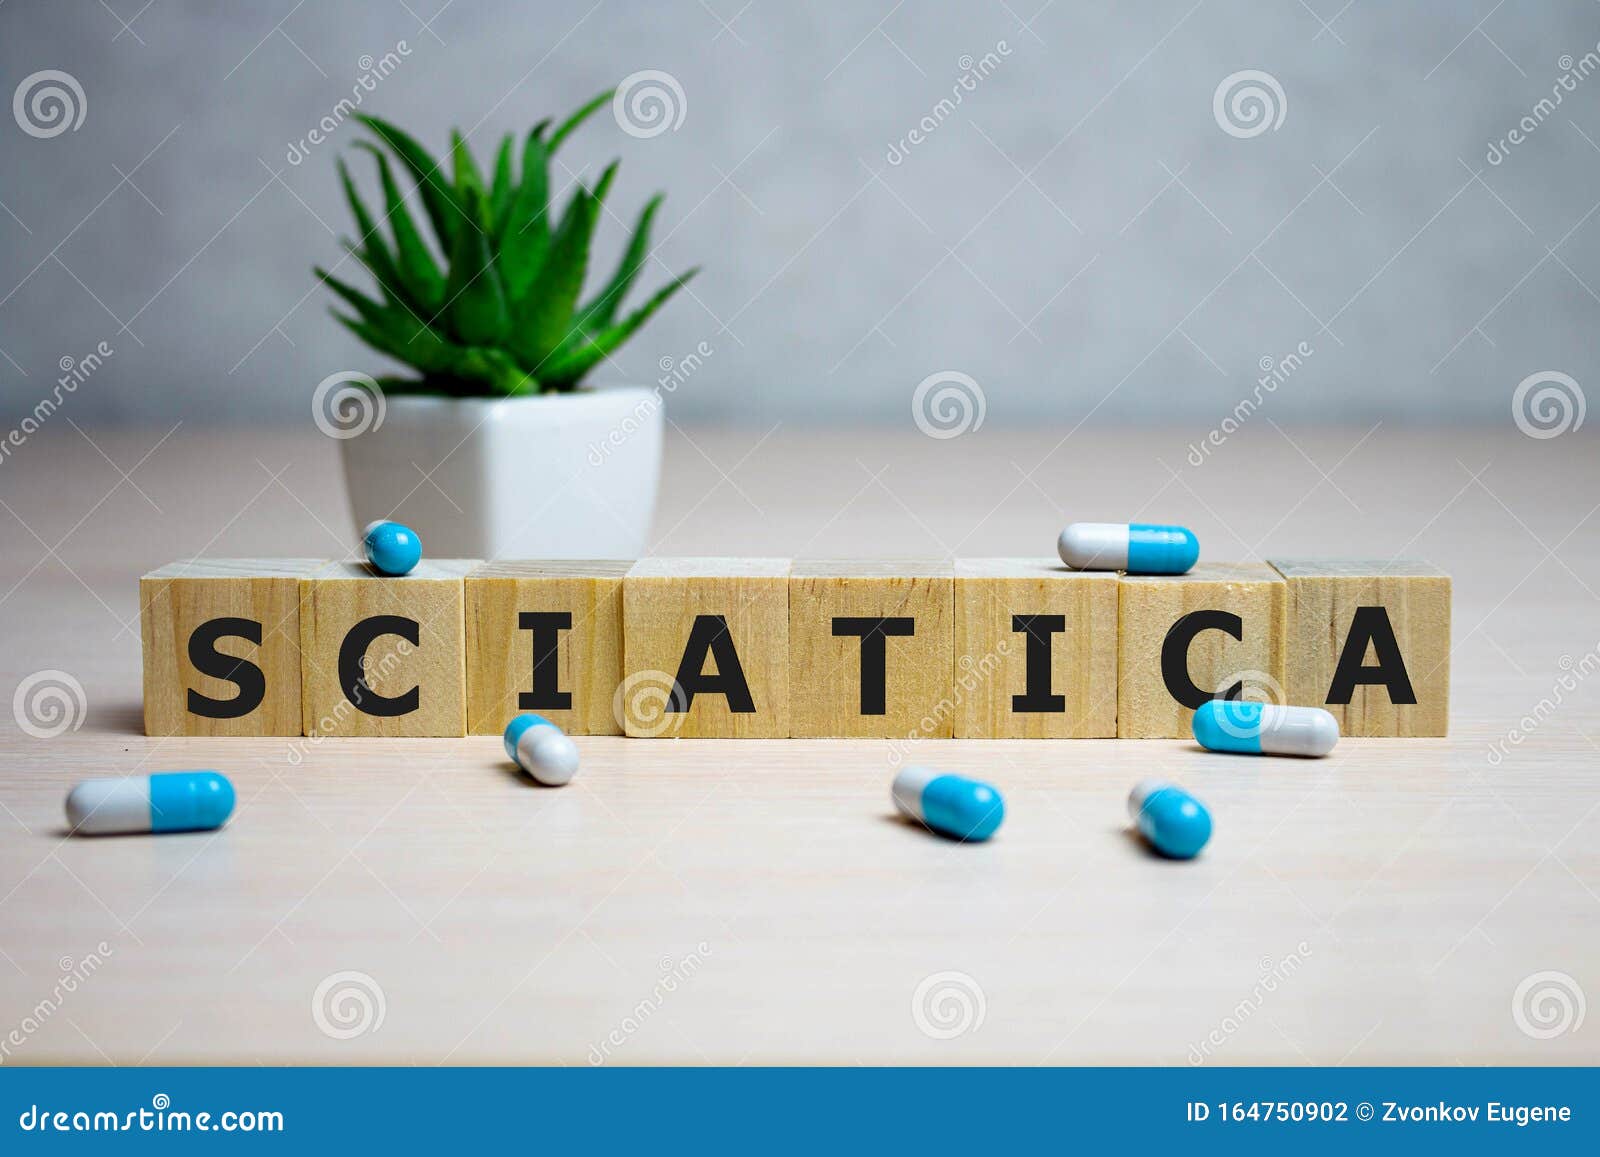 wooden cube with text sciatica. medical concept. background